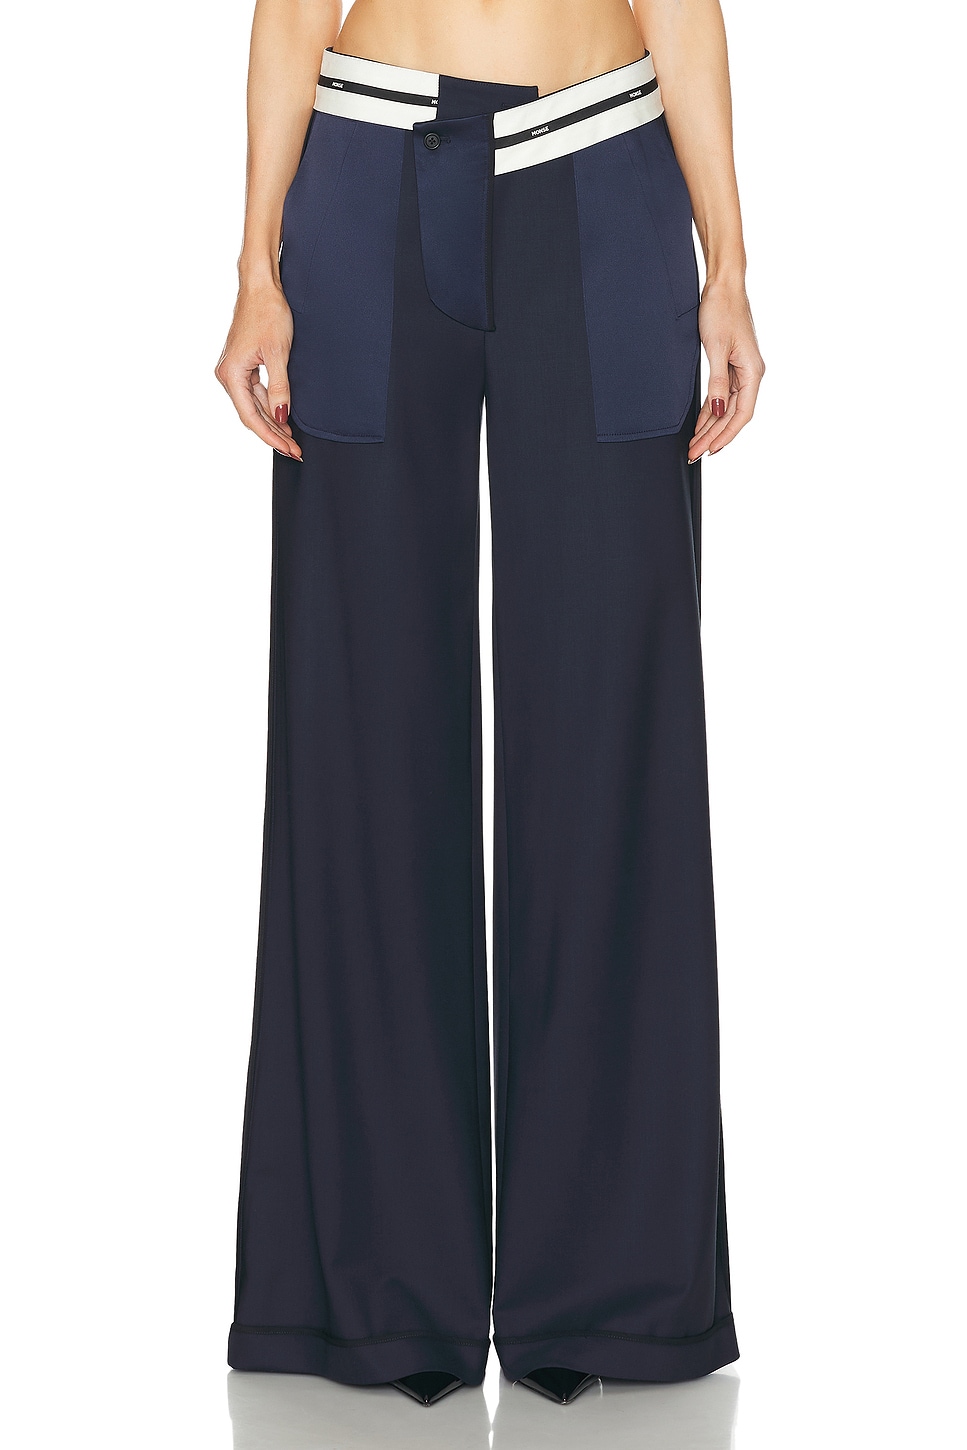 Inside Out Tailored Trouser in Navy